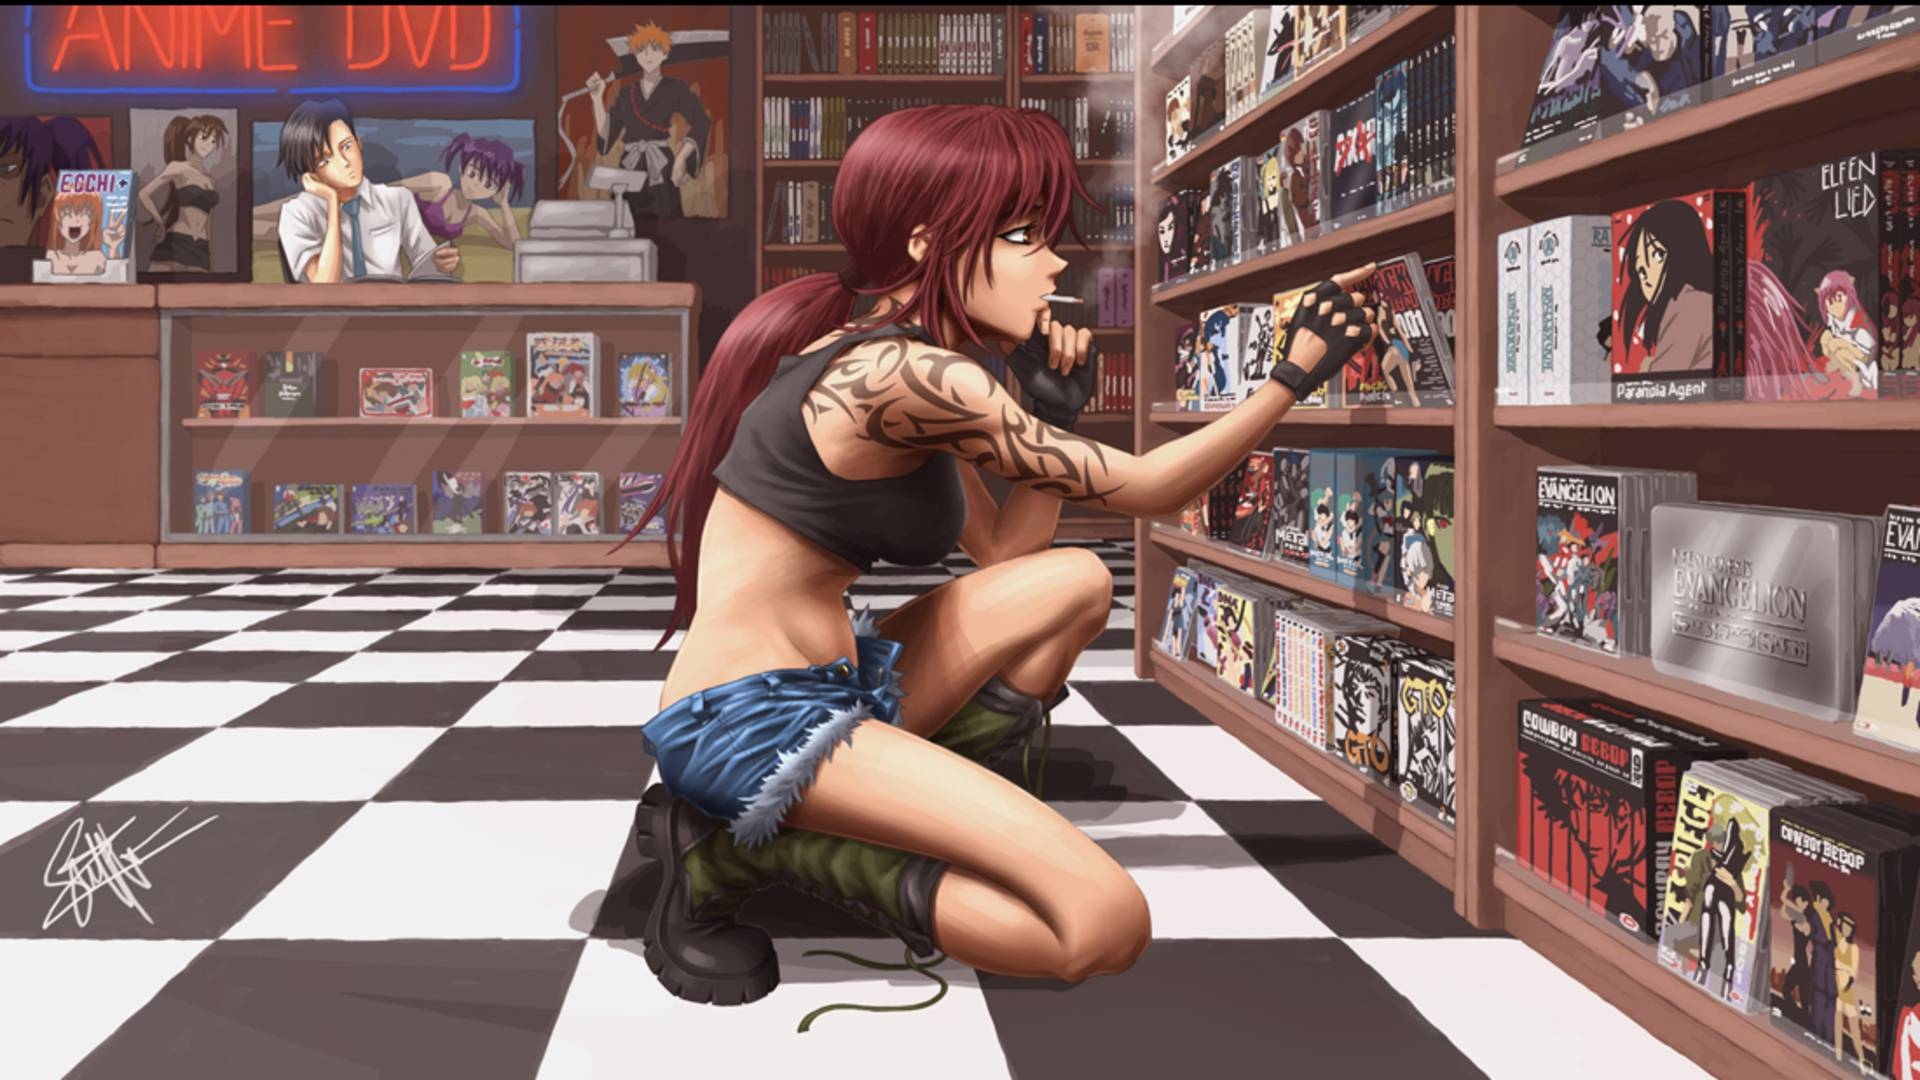 1920x1080 160+ Black Lagoon HD Wallpapers and Backgrounds